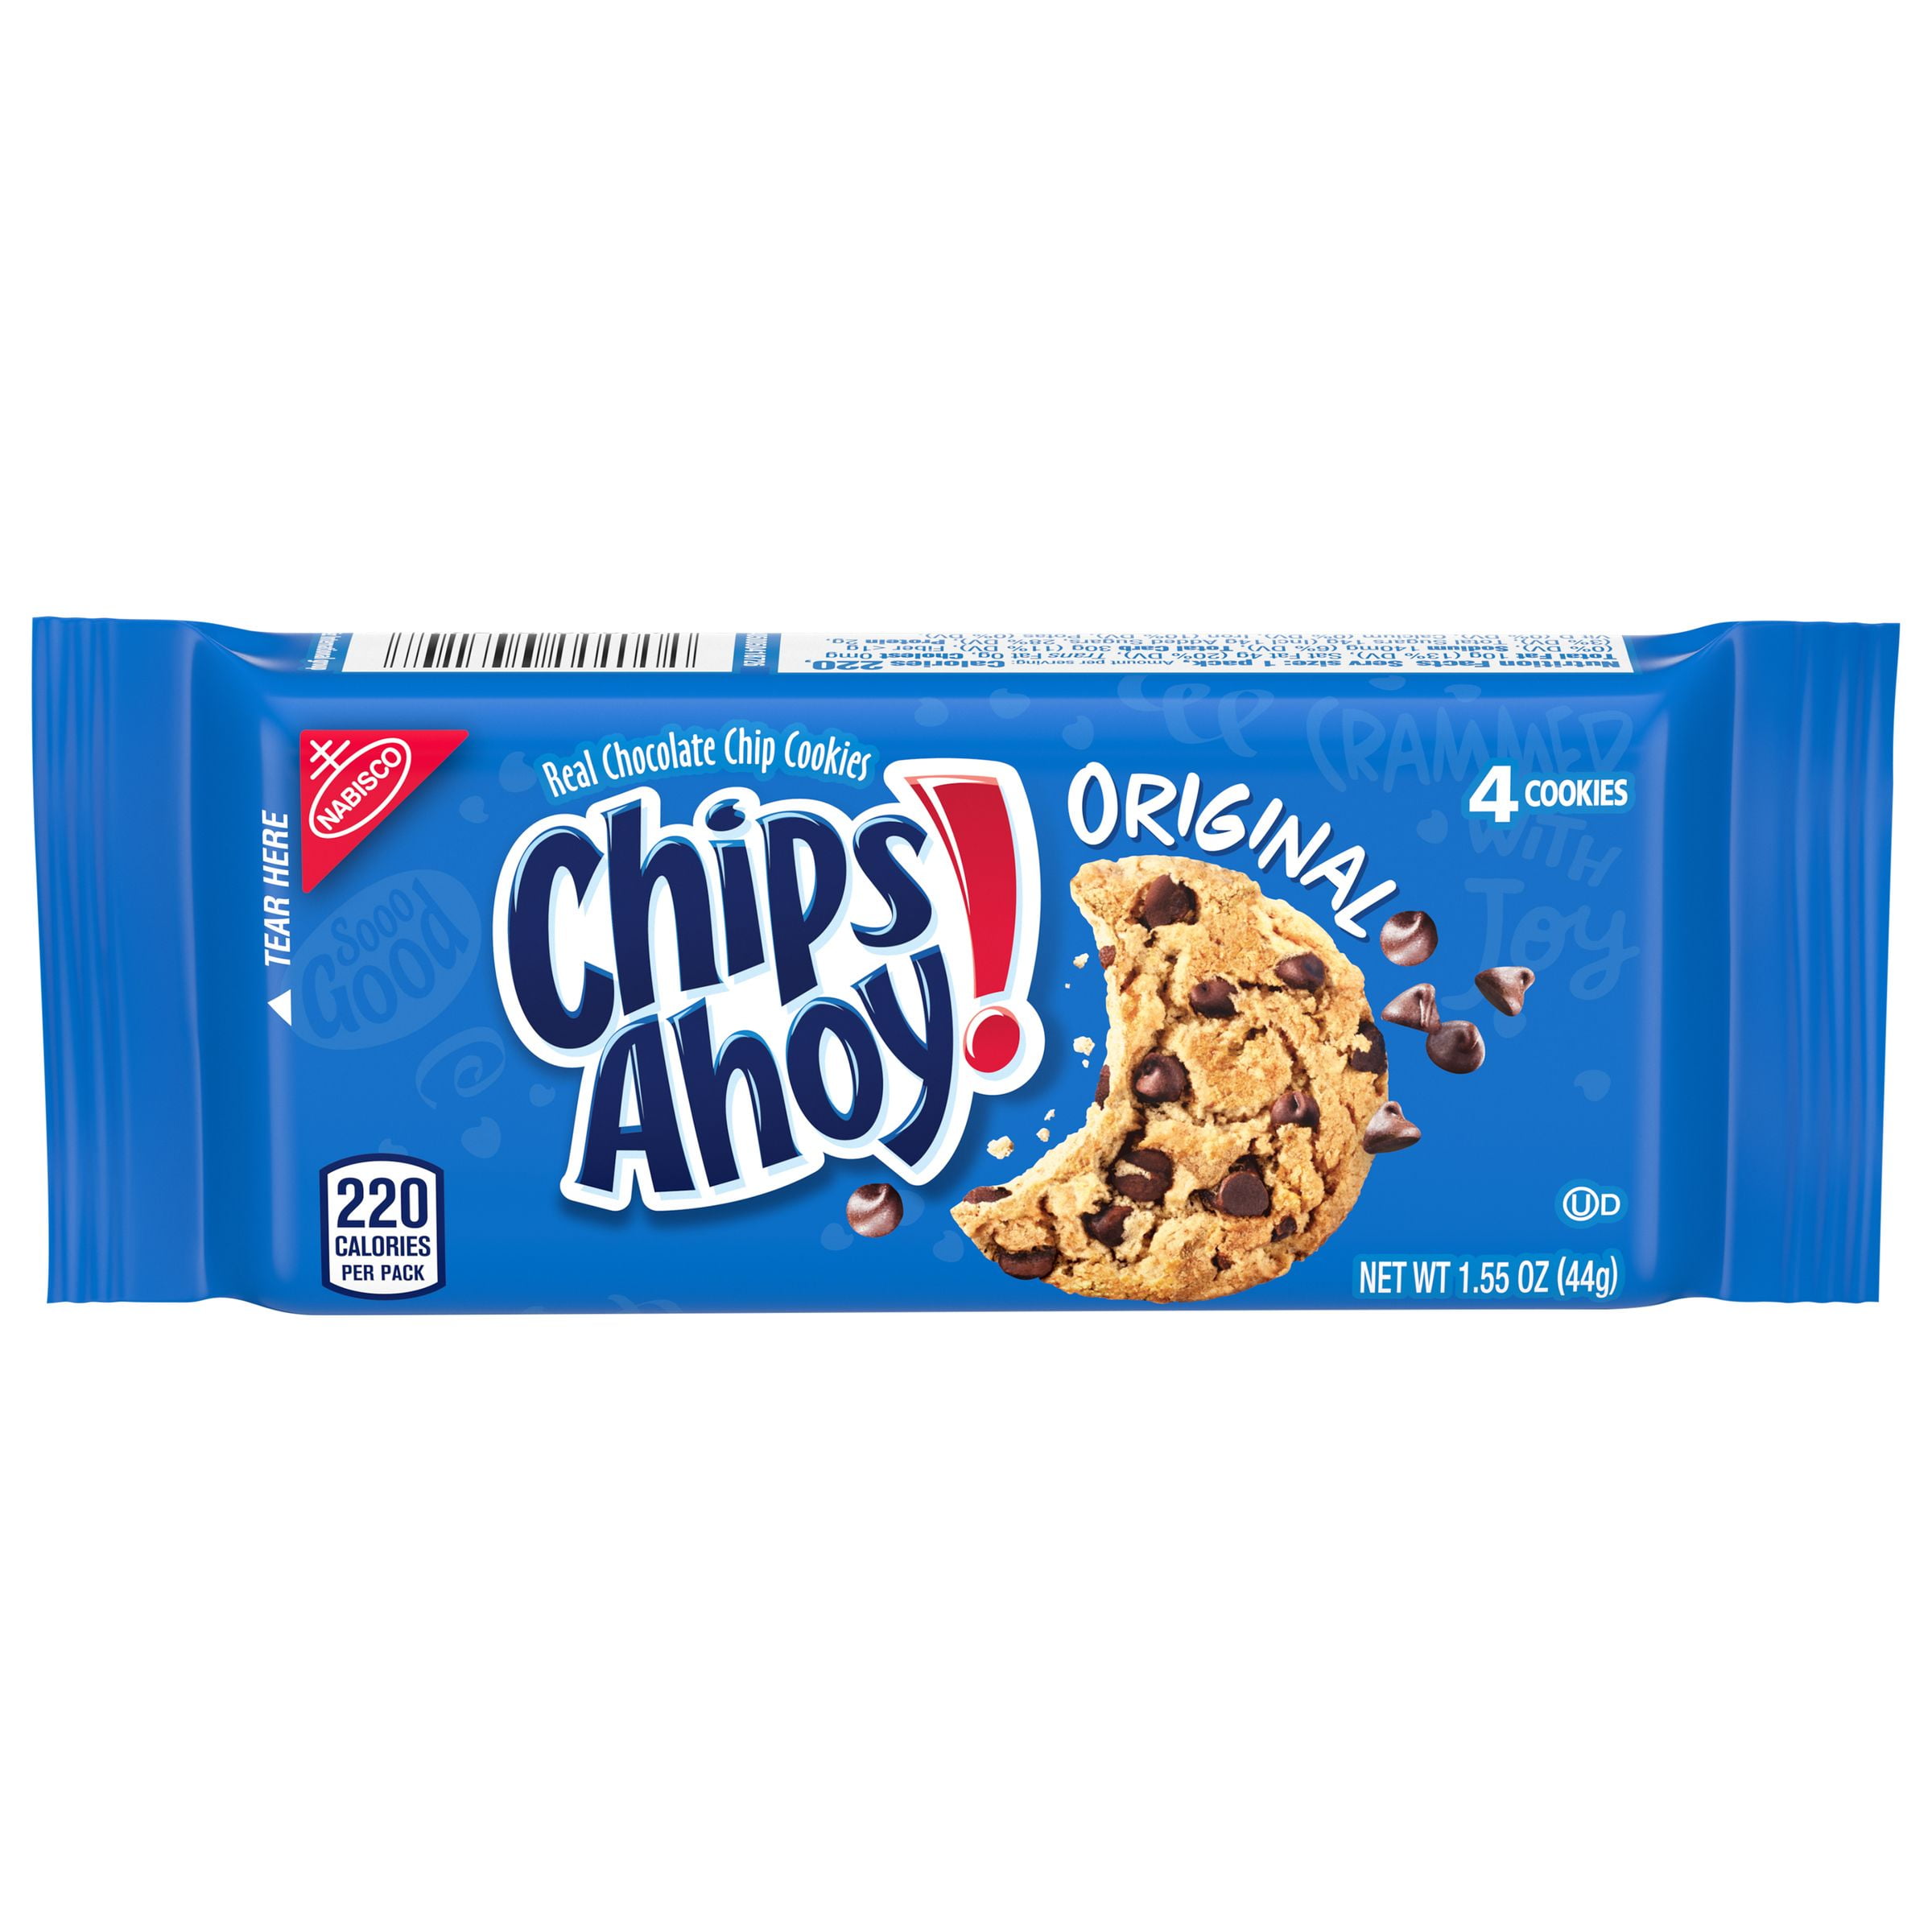 Picture of Nabisco 9700824 1.55 oz Chips Ahoy Chocolate Chip Cookies, Black - Pack of 12